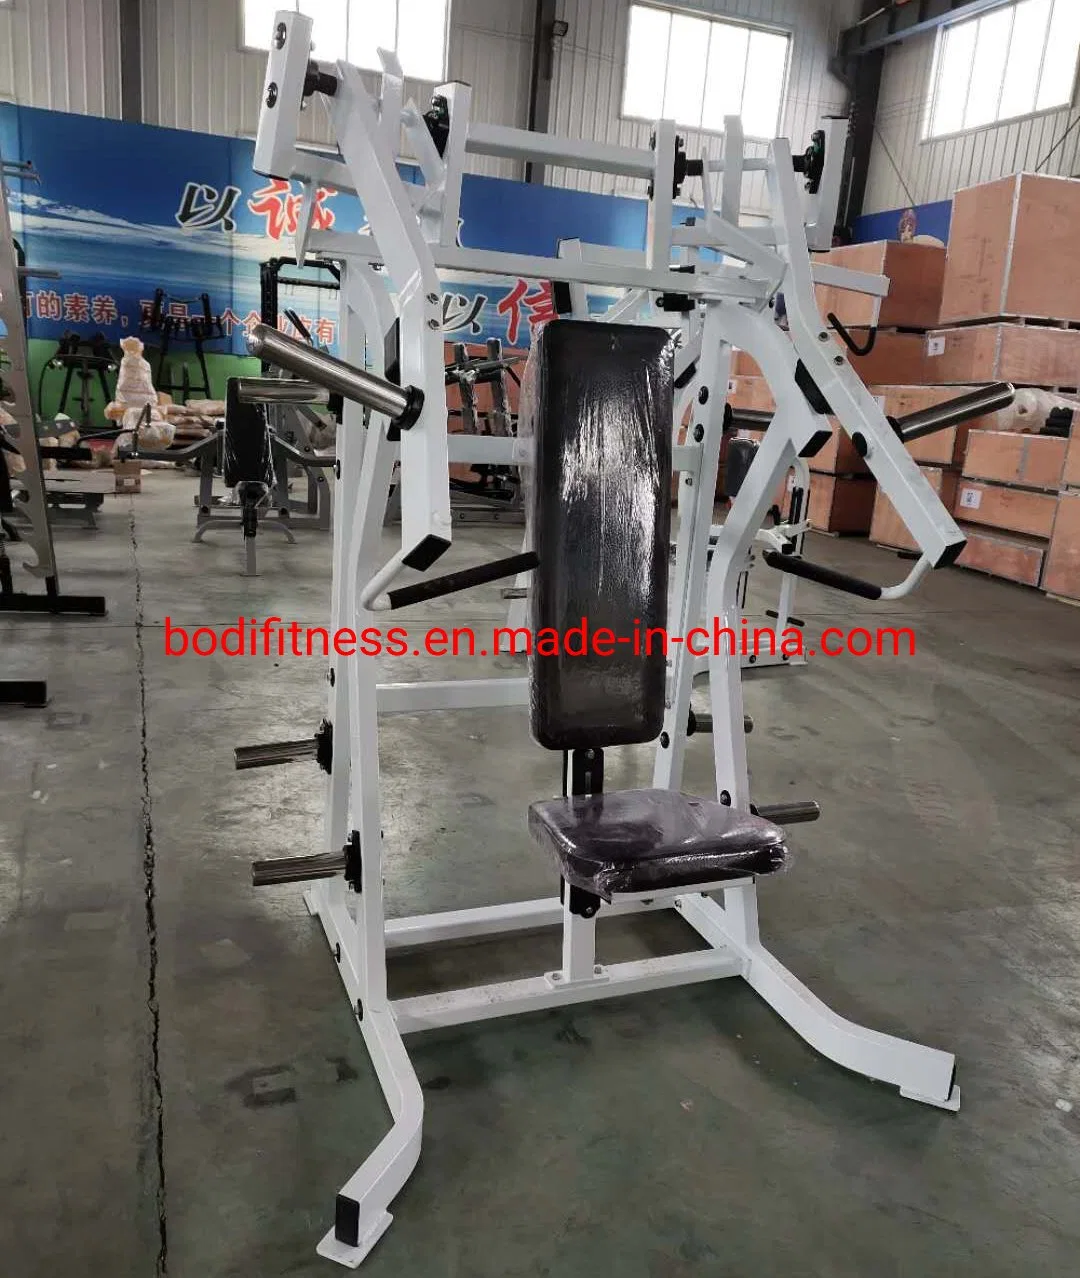 New Arrival China Gym Fitness Equipment with Best Design Plate Loaded Glute Hip Thrust Machine